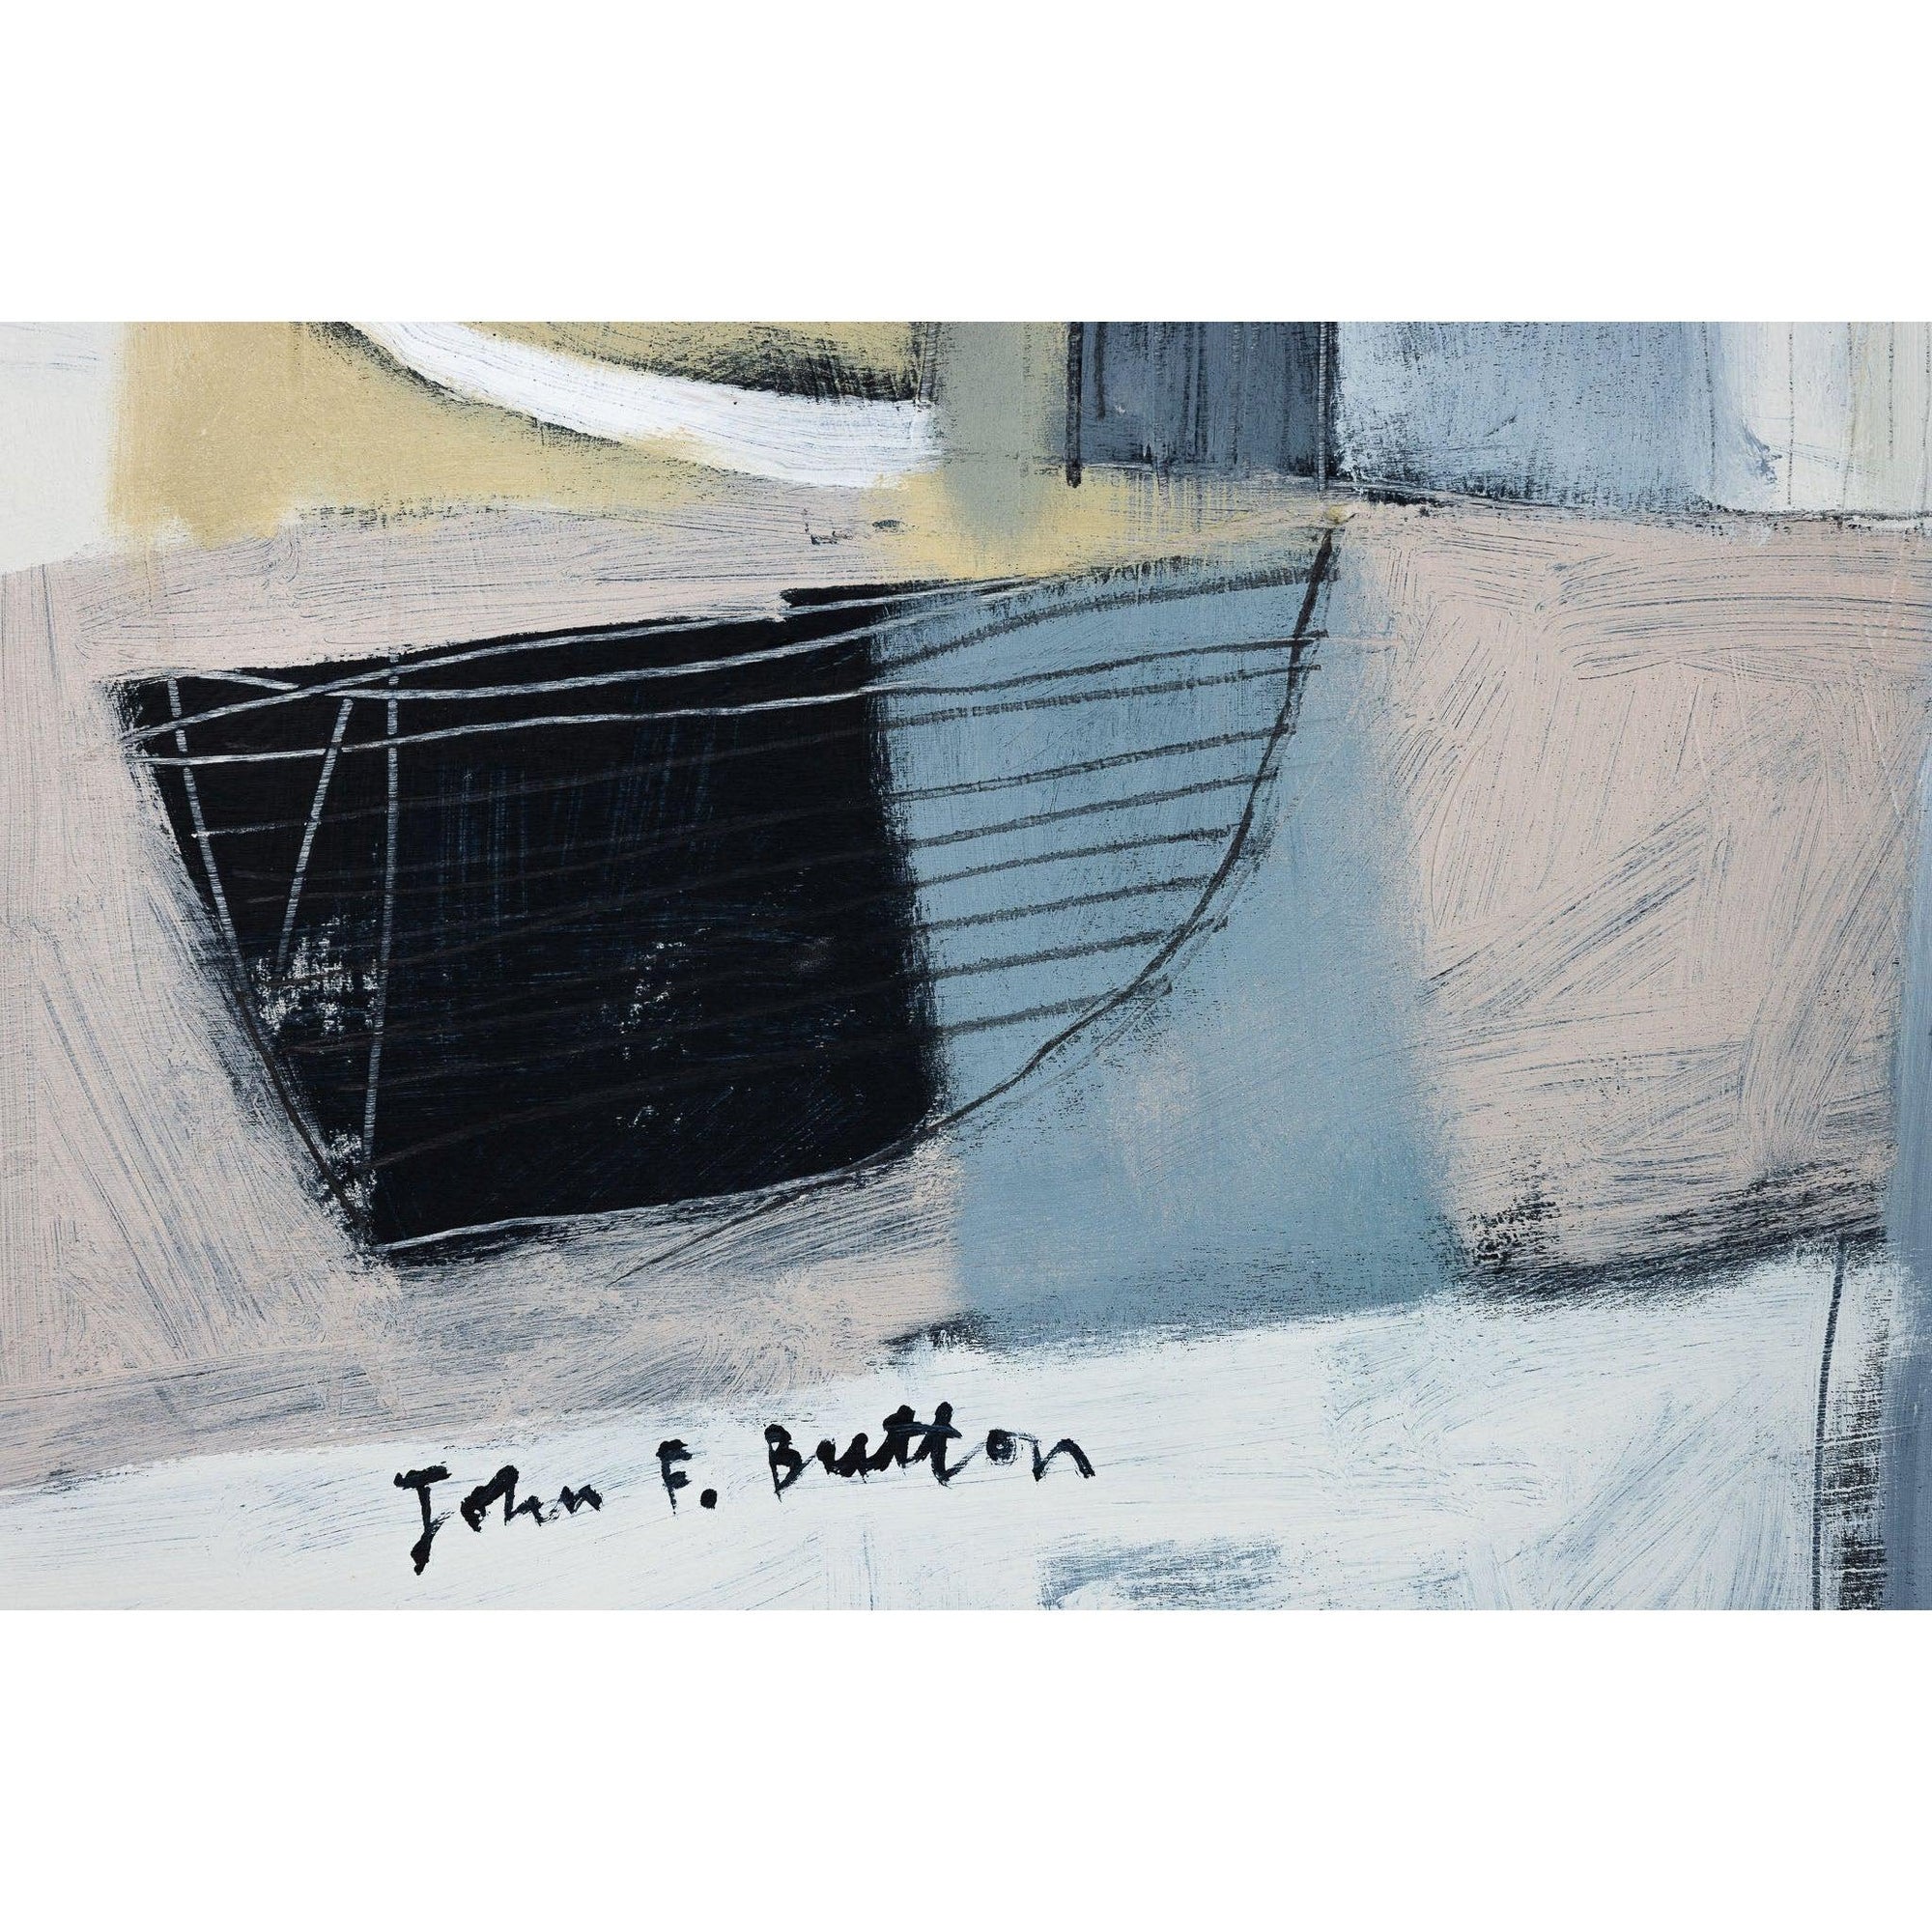 After Hours by John Button, mixed media original, available at Padstow Gallery, Cornwall